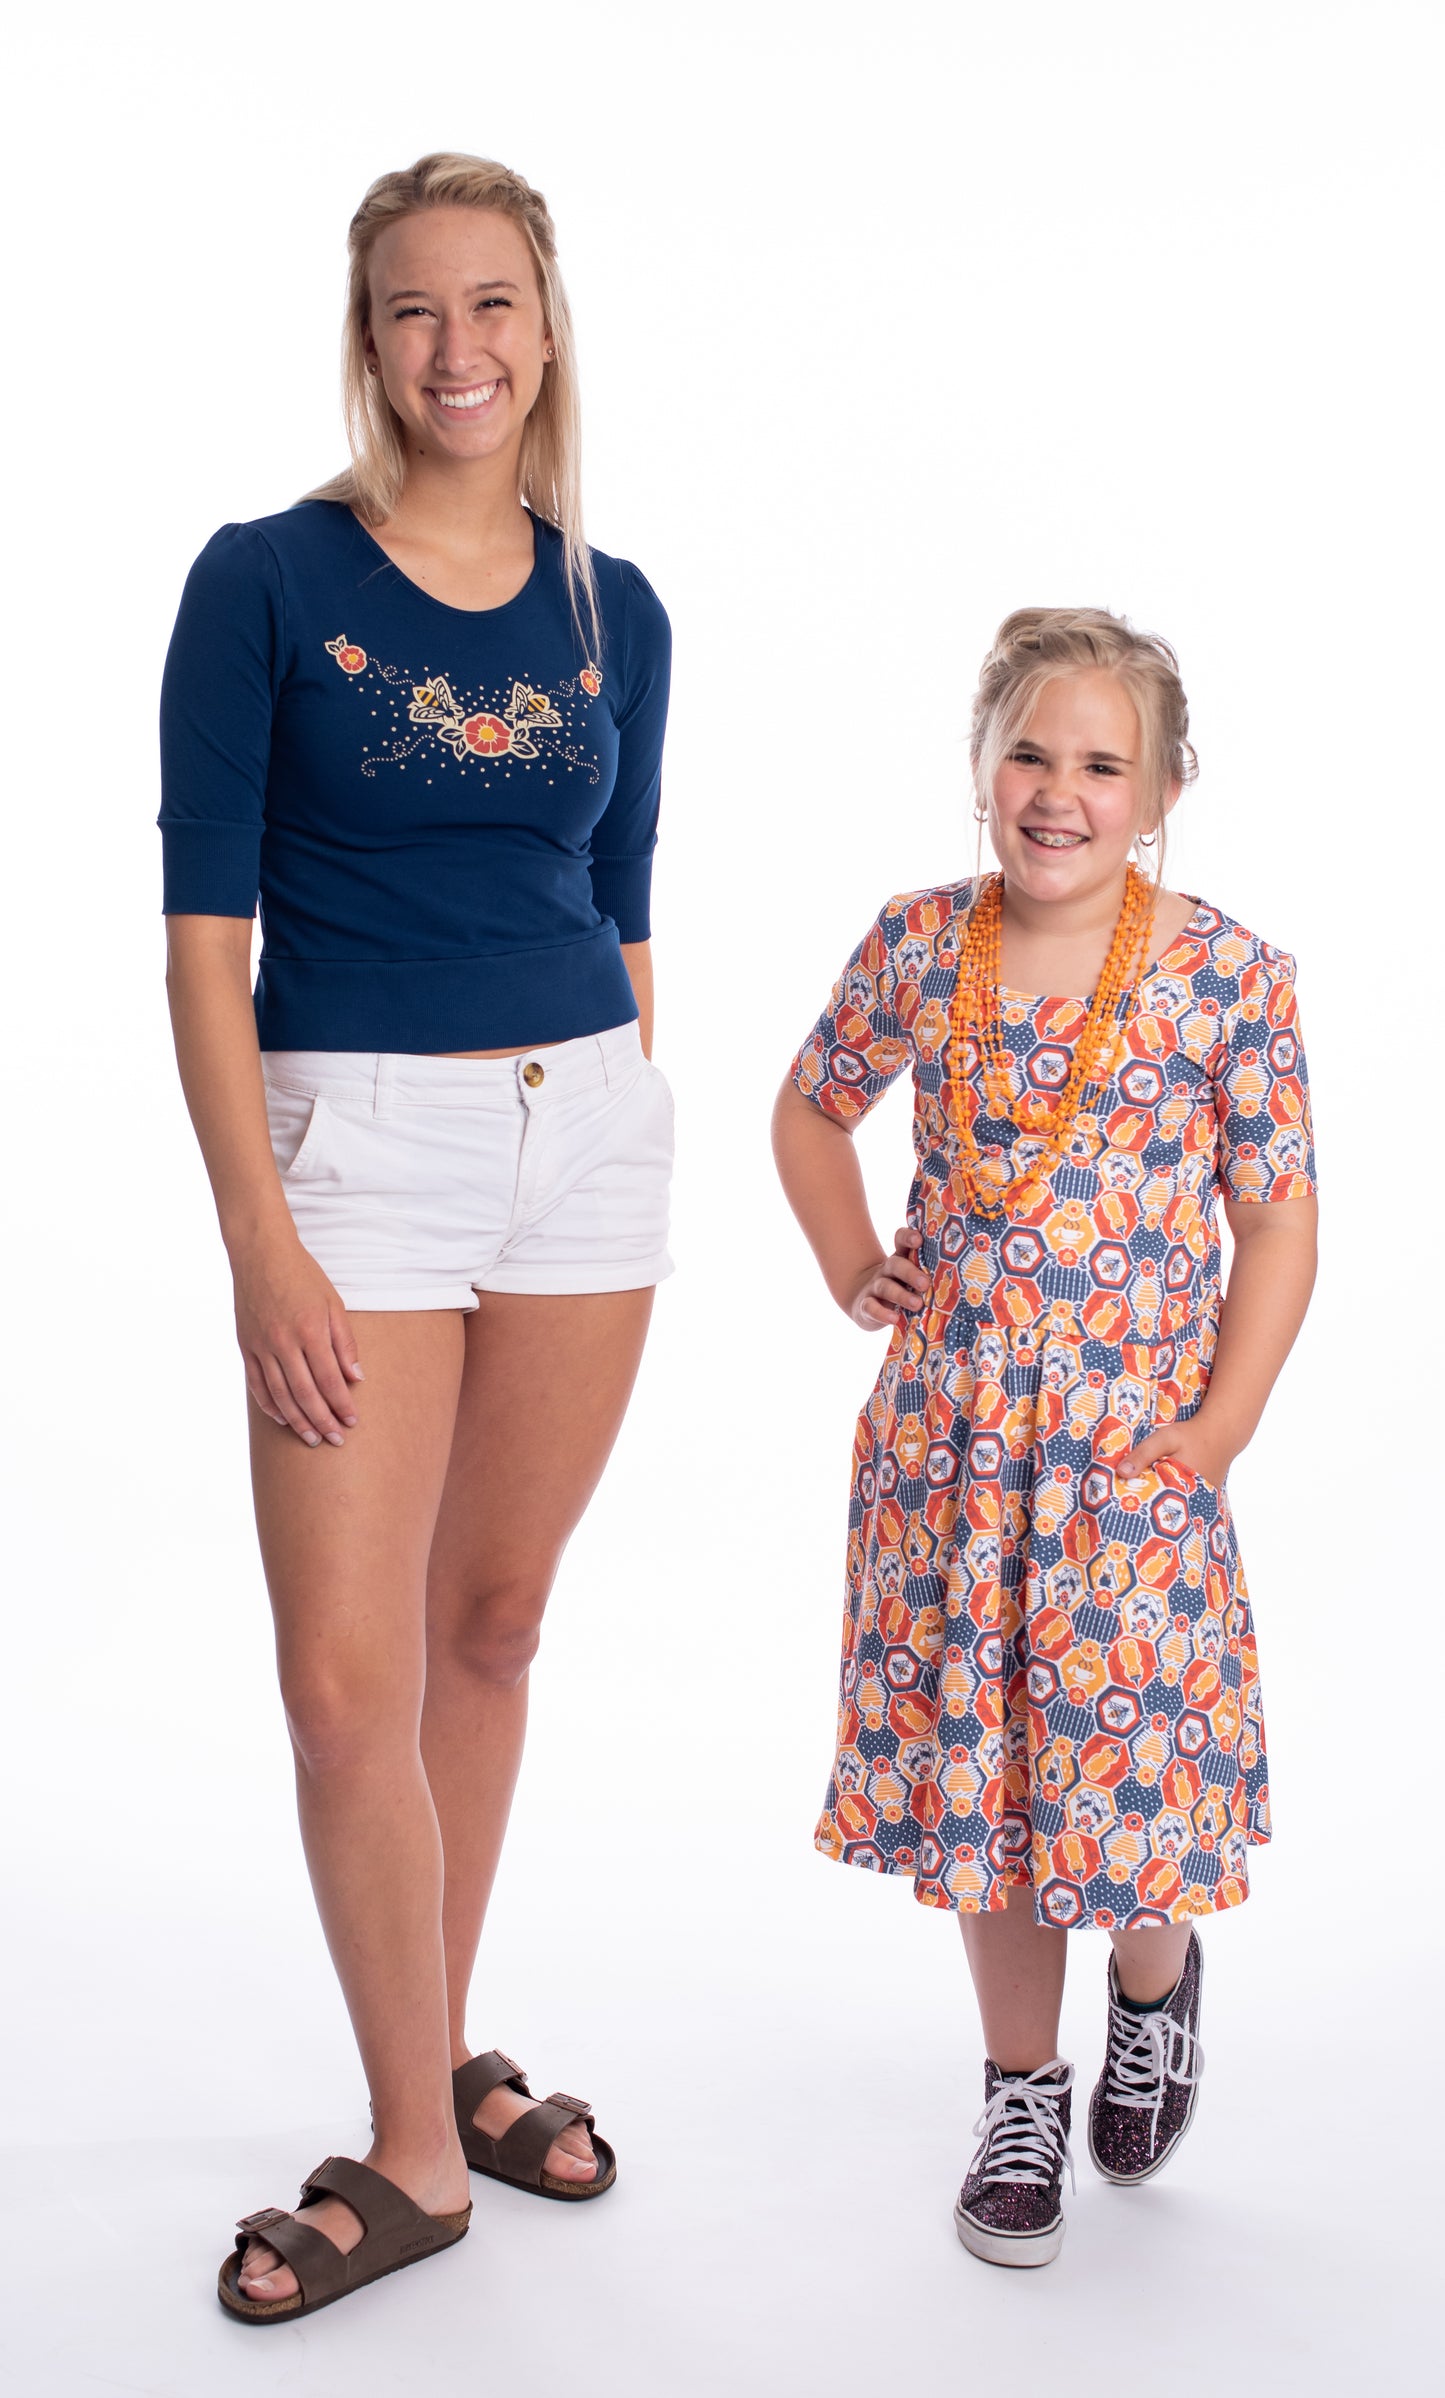 Navy blue scoop neck cropped French terry top with print of bees and flowers on blonde model with child in fun geometric dress